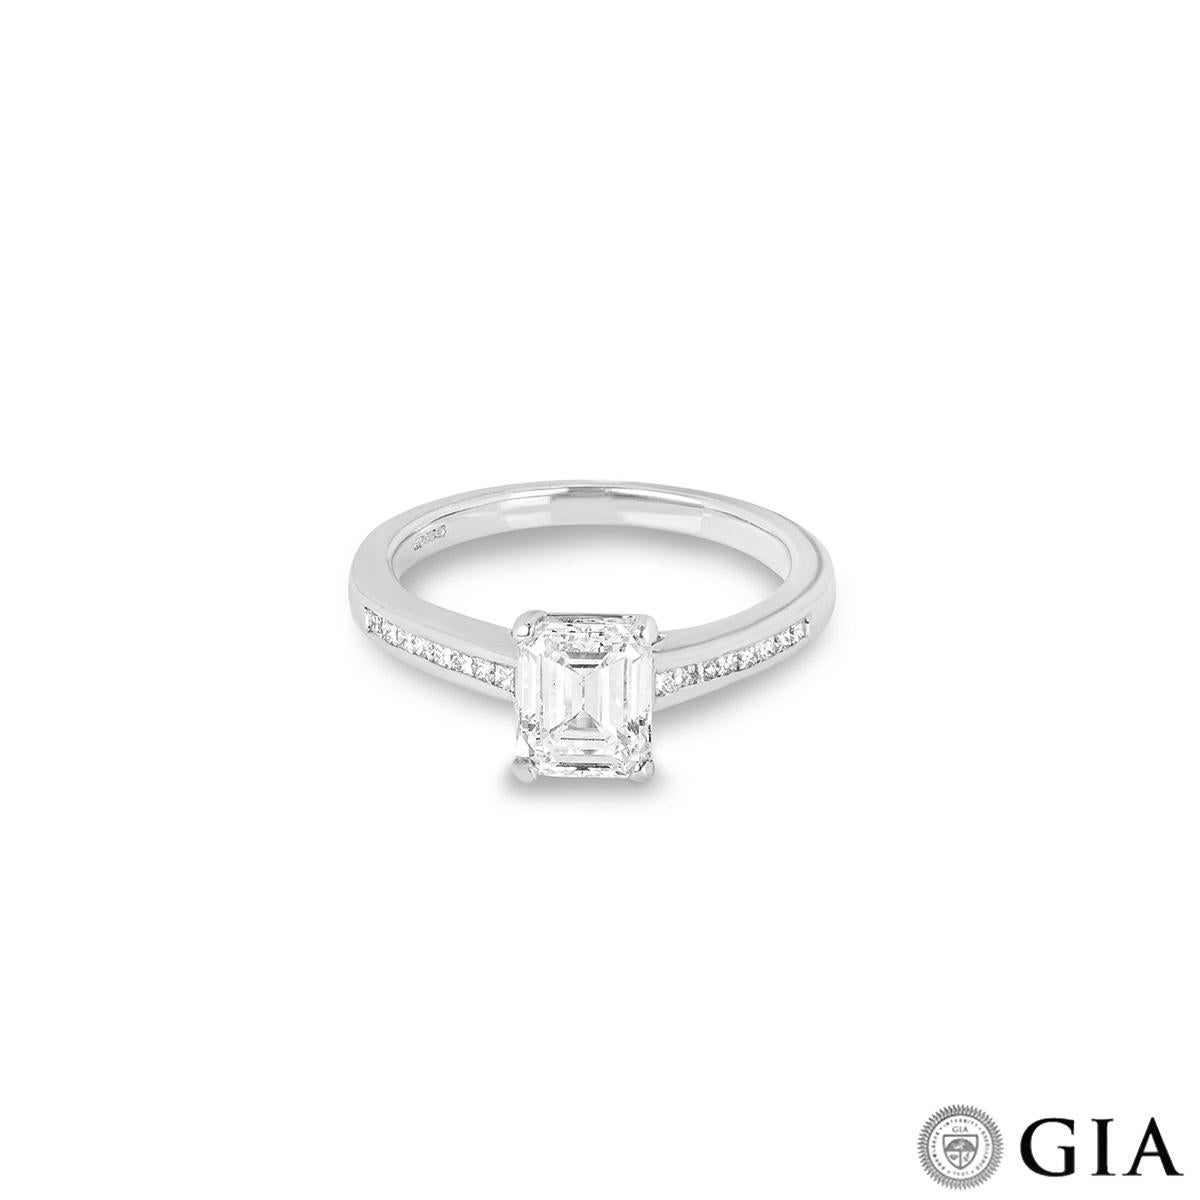 GIA Certified White Gold Emerald Cut Diamond Ring 1.12ct F/VVS2 In New Condition For Sale In London, GB